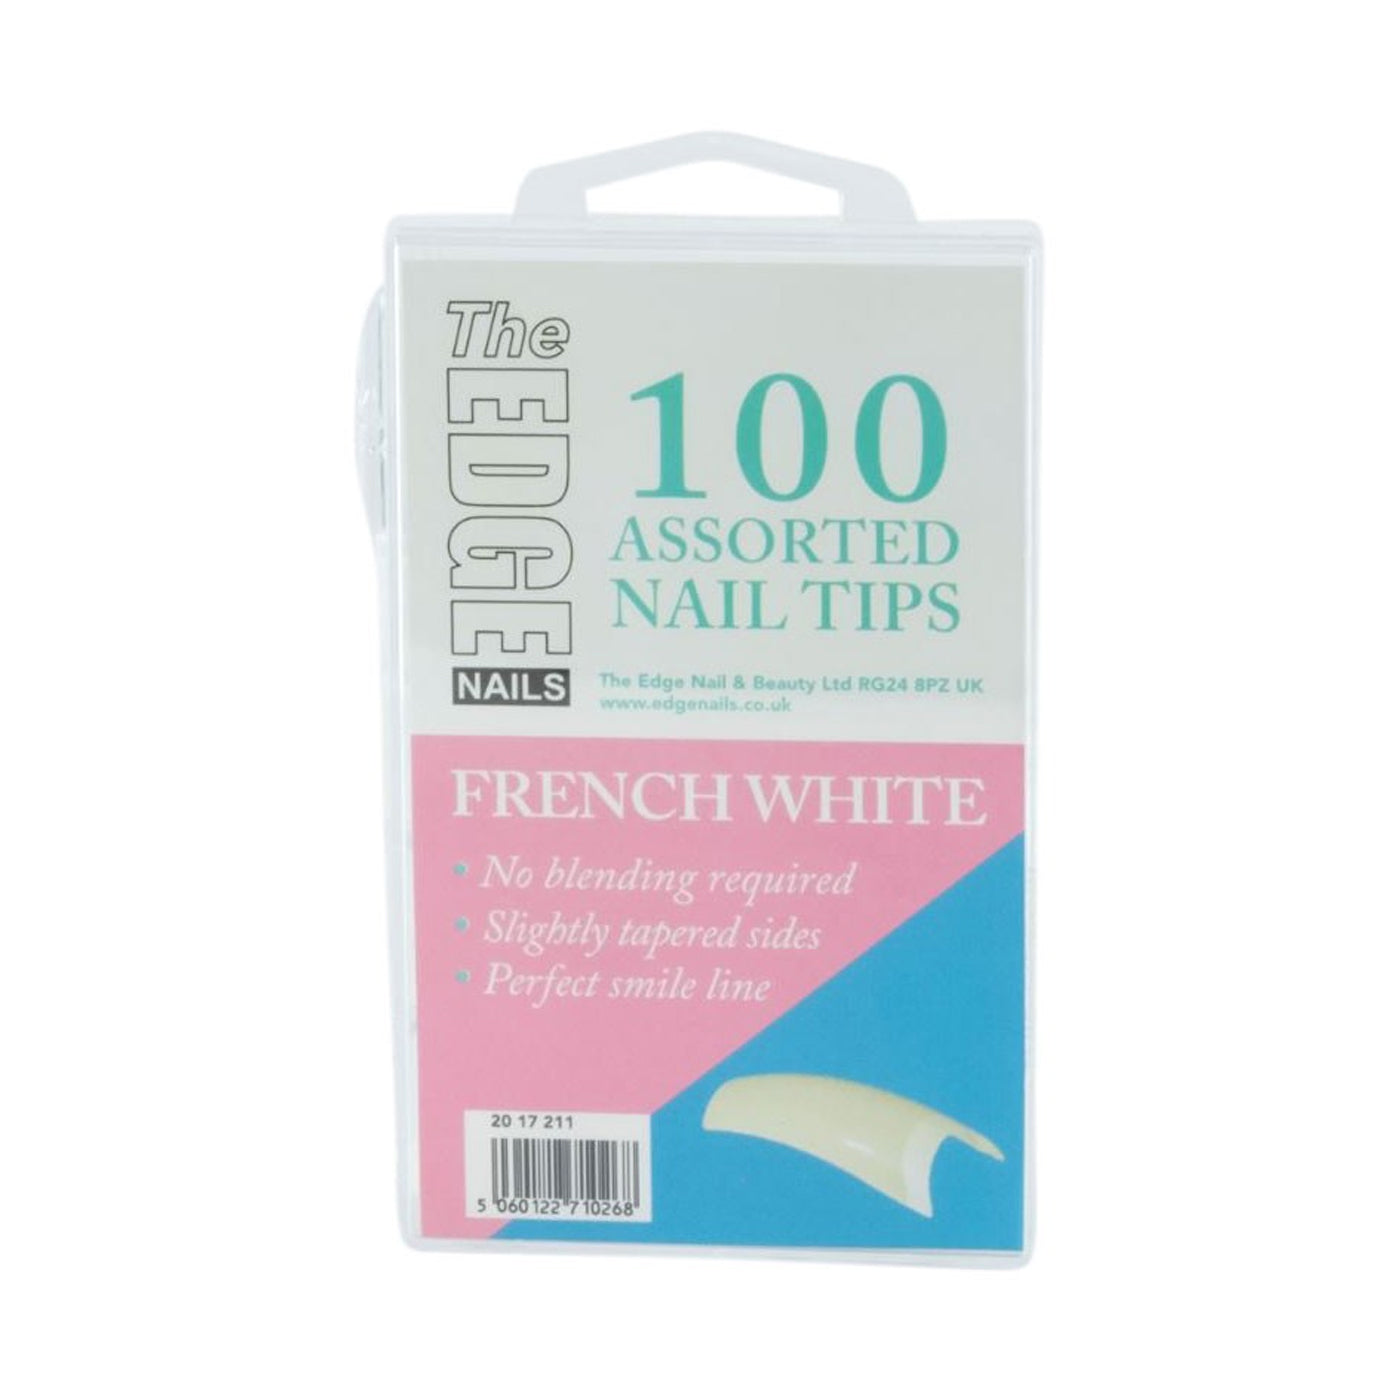 Edge Nails French White Tips Assorted Pack (x100) - Ultimate Hair and Beauty